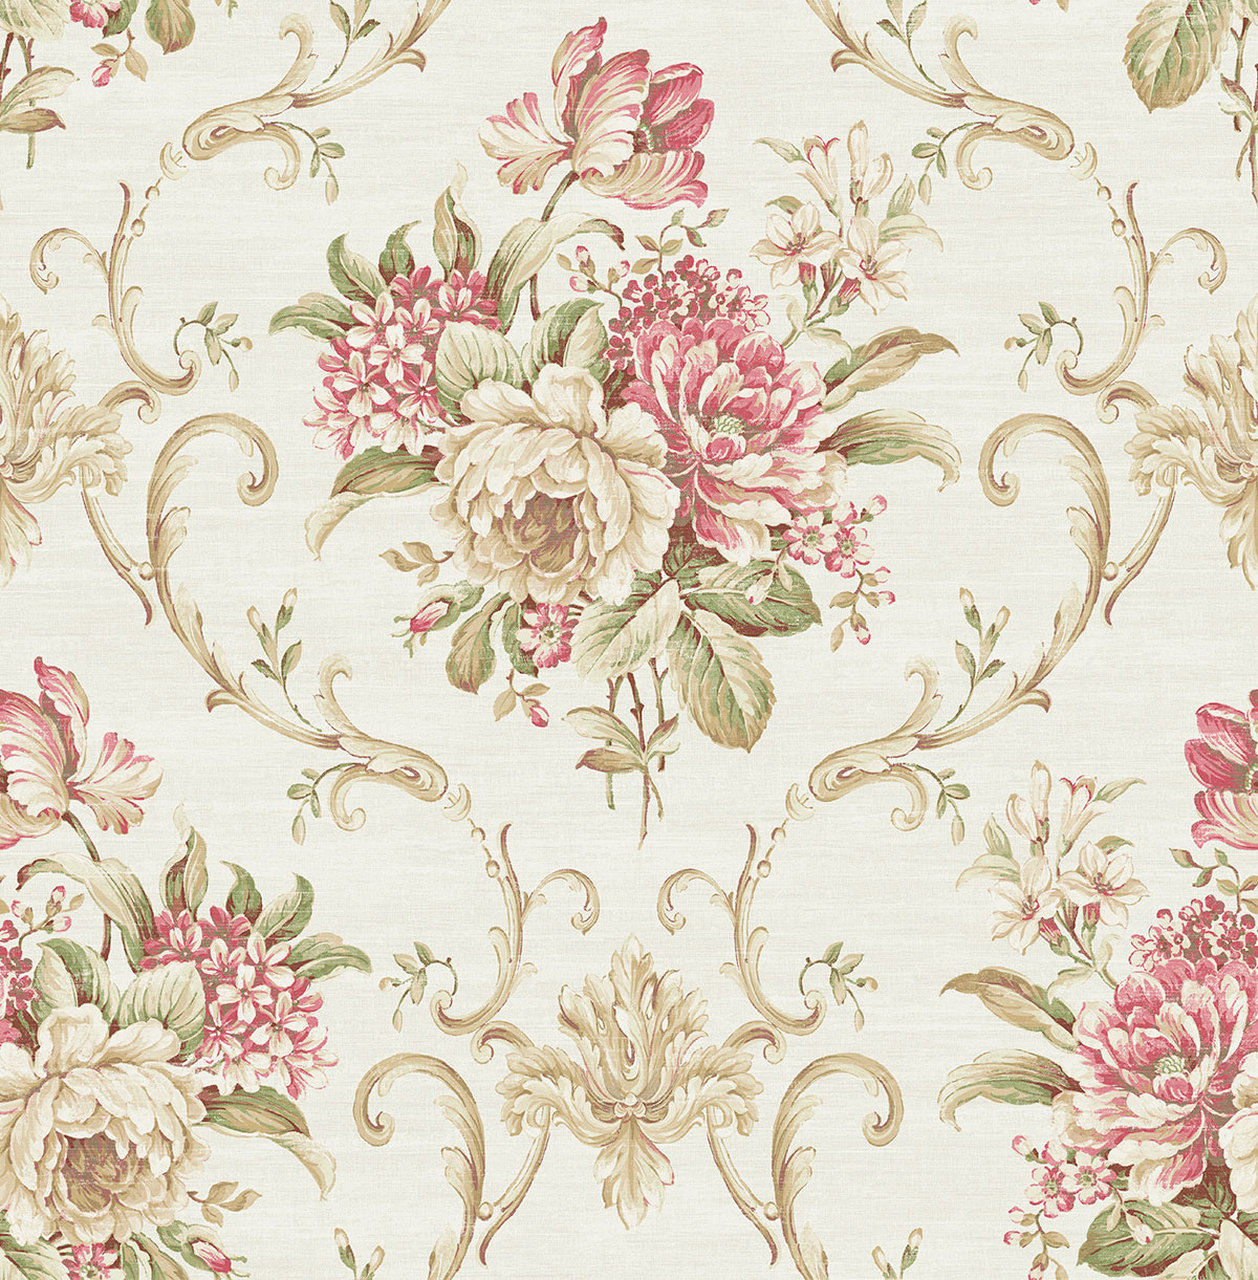 Floral Cameo Wallpaper In Rosy Rv20014 From Wallquest The Savvy